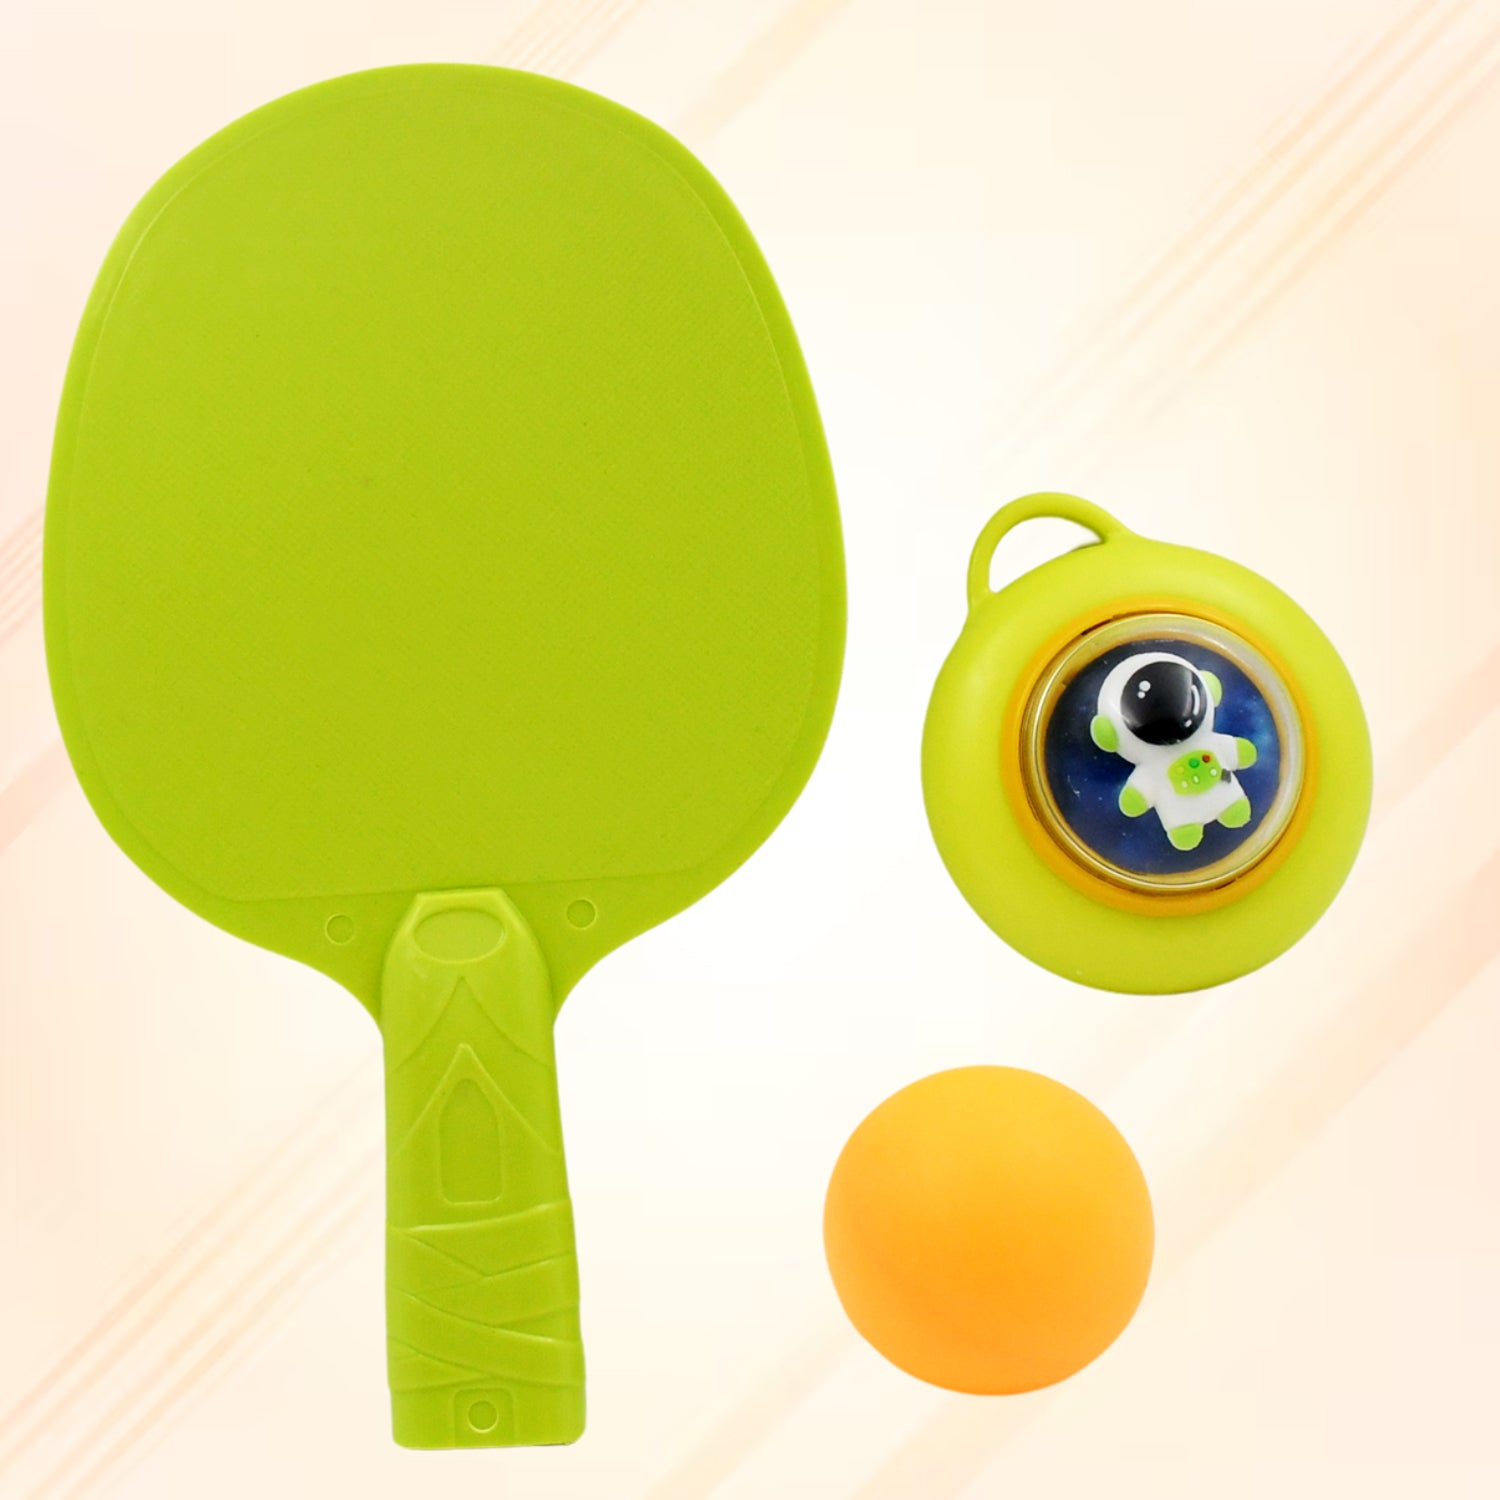 17640 Portable Indoor Hanging Table Tennis with Five Ball, Table Tennis Self Training Set